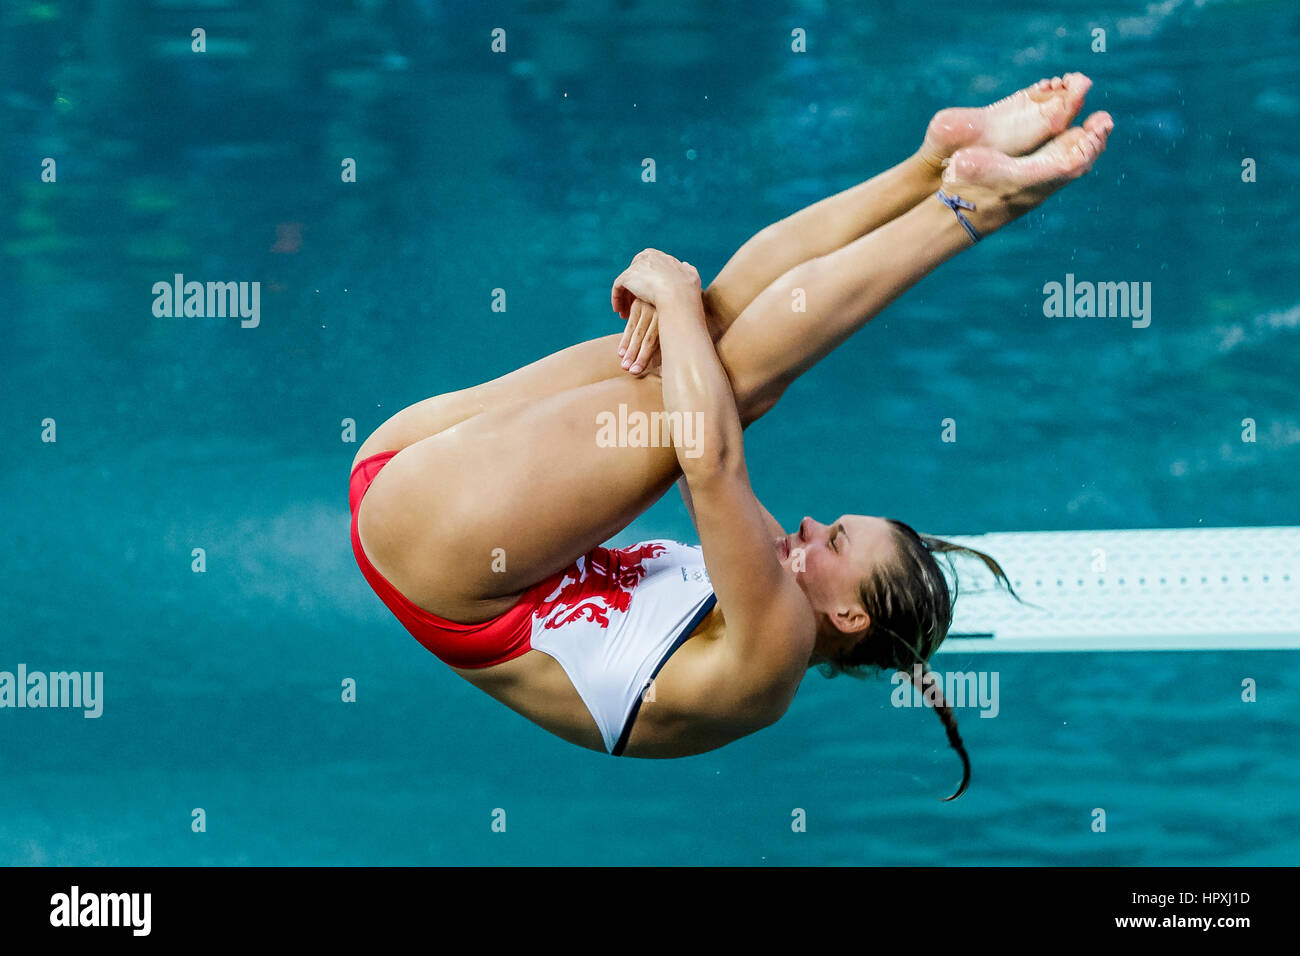 Rio de Janeiro, Brazil. 14 August 2016 Grace Reid (GBR) competes in the Women Diving Springboard 3m final at the 2016 Olympic Summer Games. ©Paul J. S Stock Photo